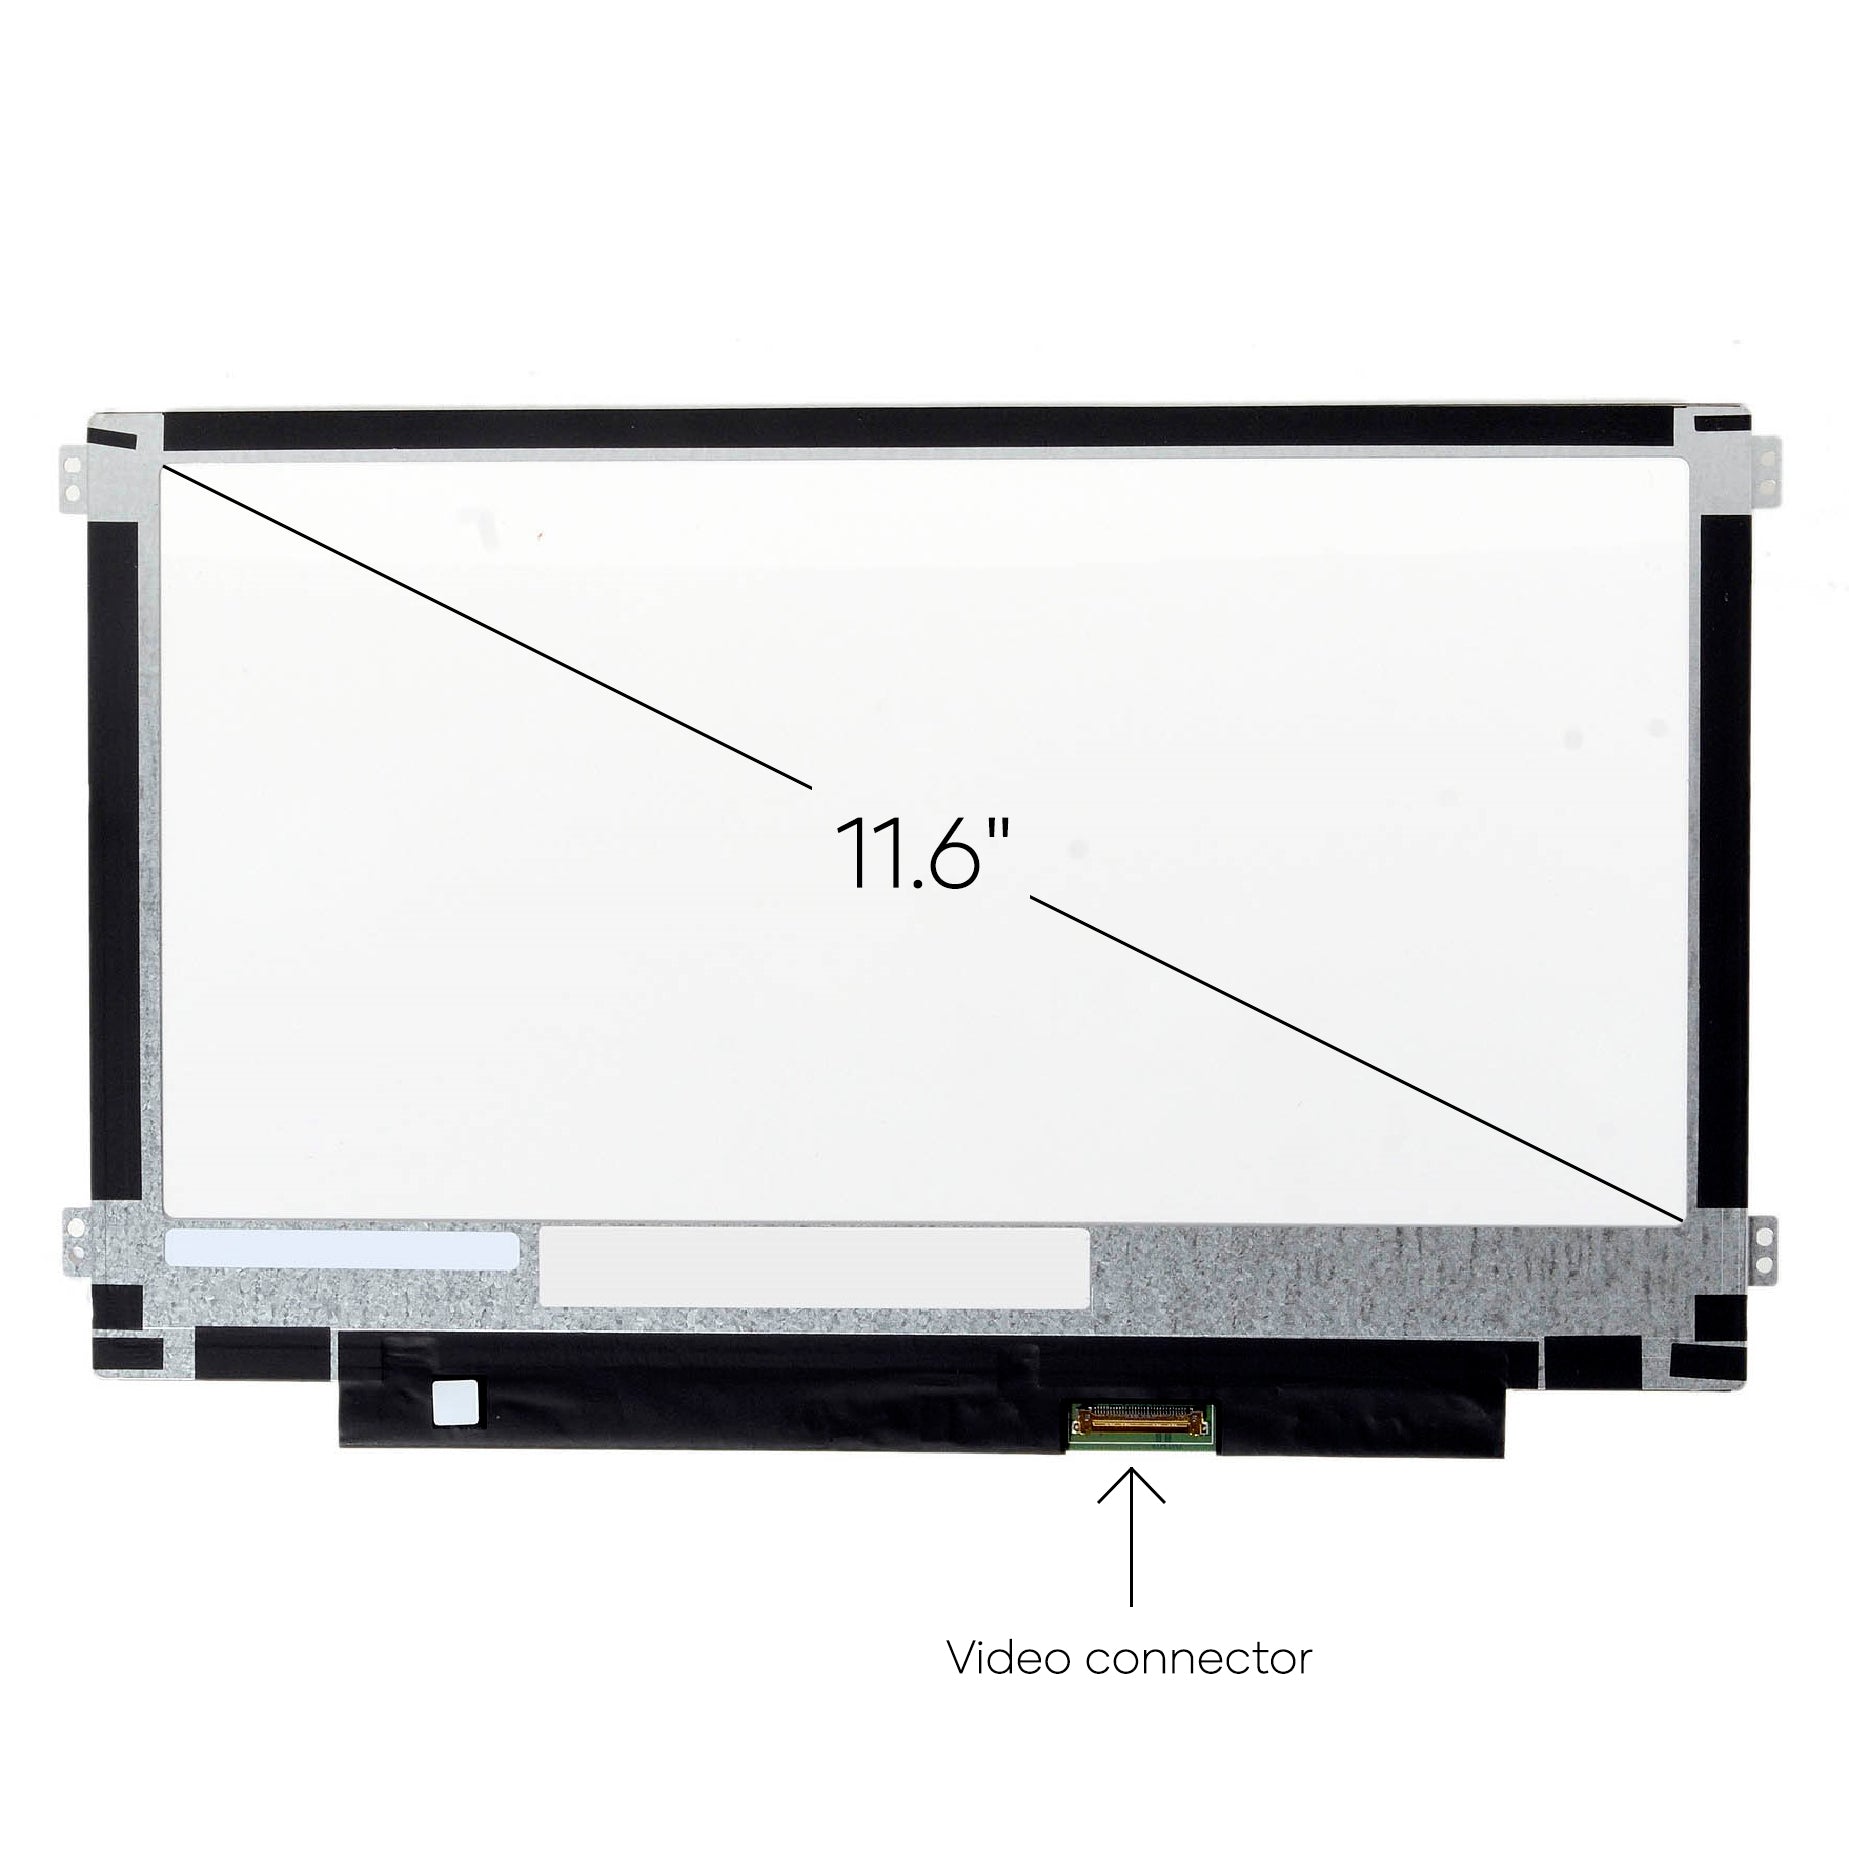 Screen Replacement for Samsung Chromebook XE501C13-K01US HD 1366x768 Matte LCD LED Display